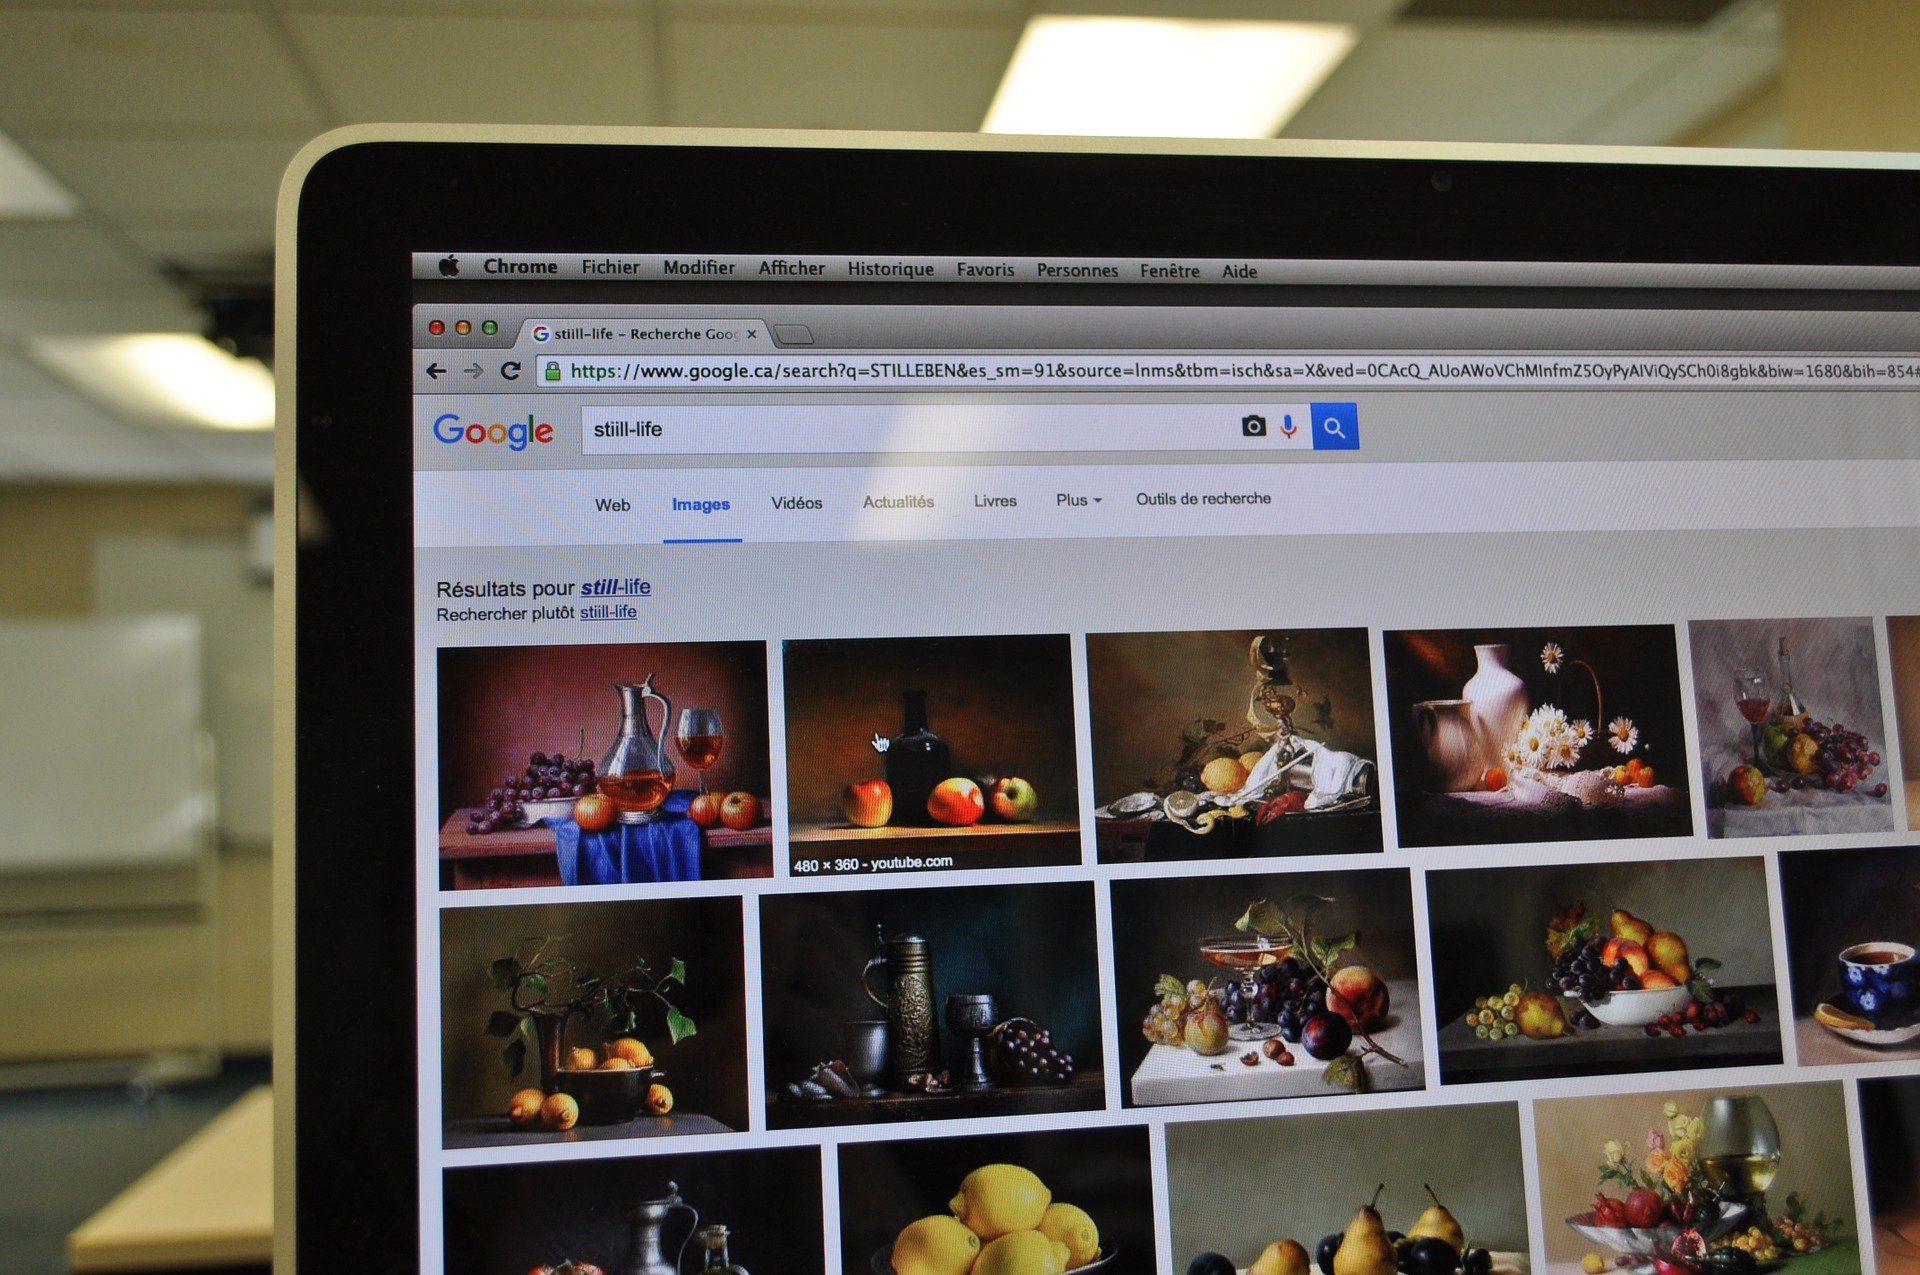 Google Image Search results layout